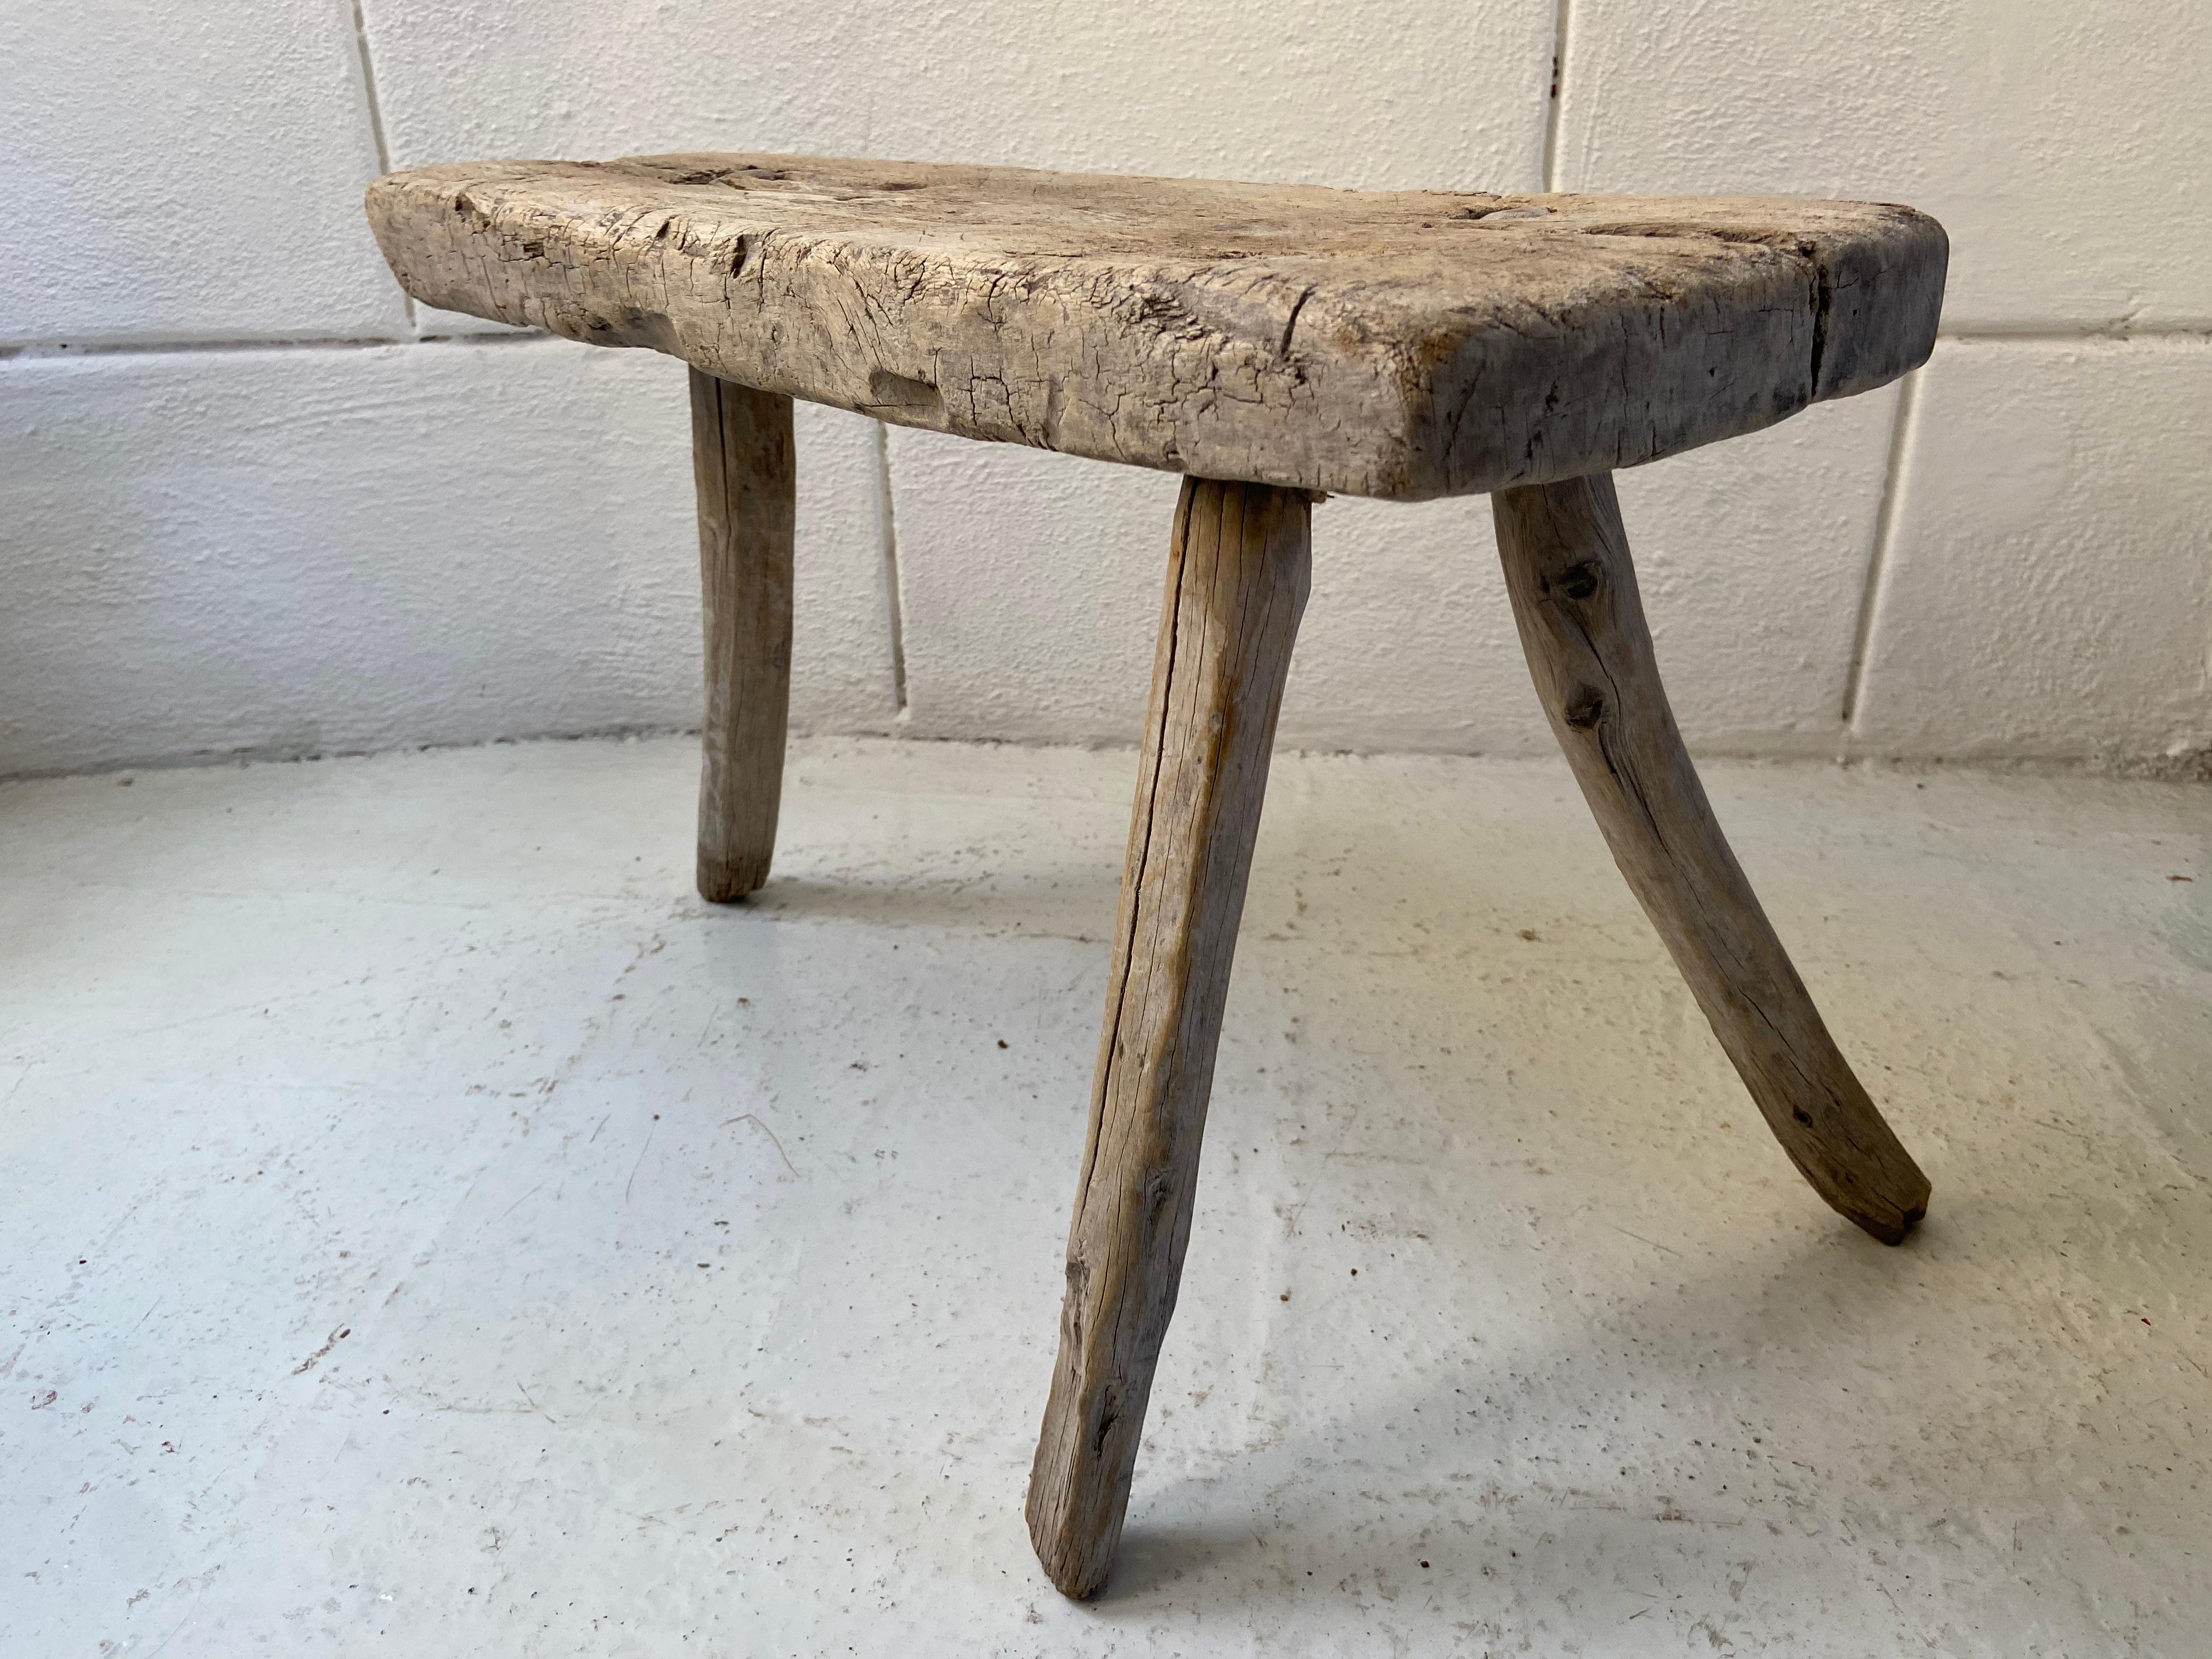 20th Century Primitive Hardwood Stool from Mexico